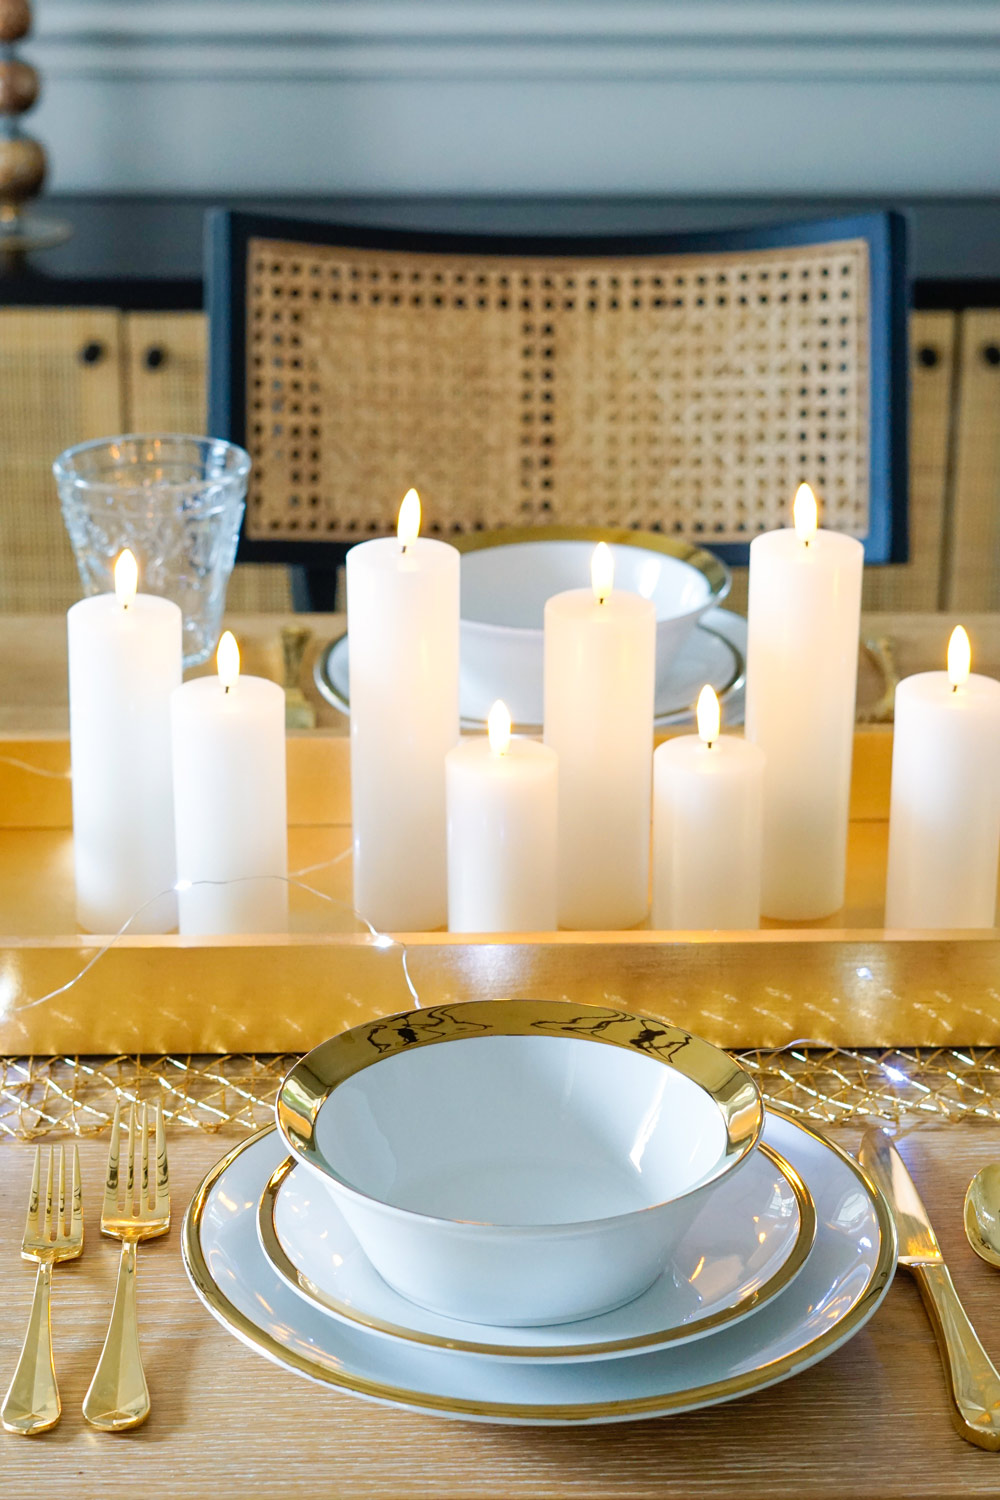 Table with a gold tray filled with candles in the center. White dinnerware with gold trim and gold flatware.